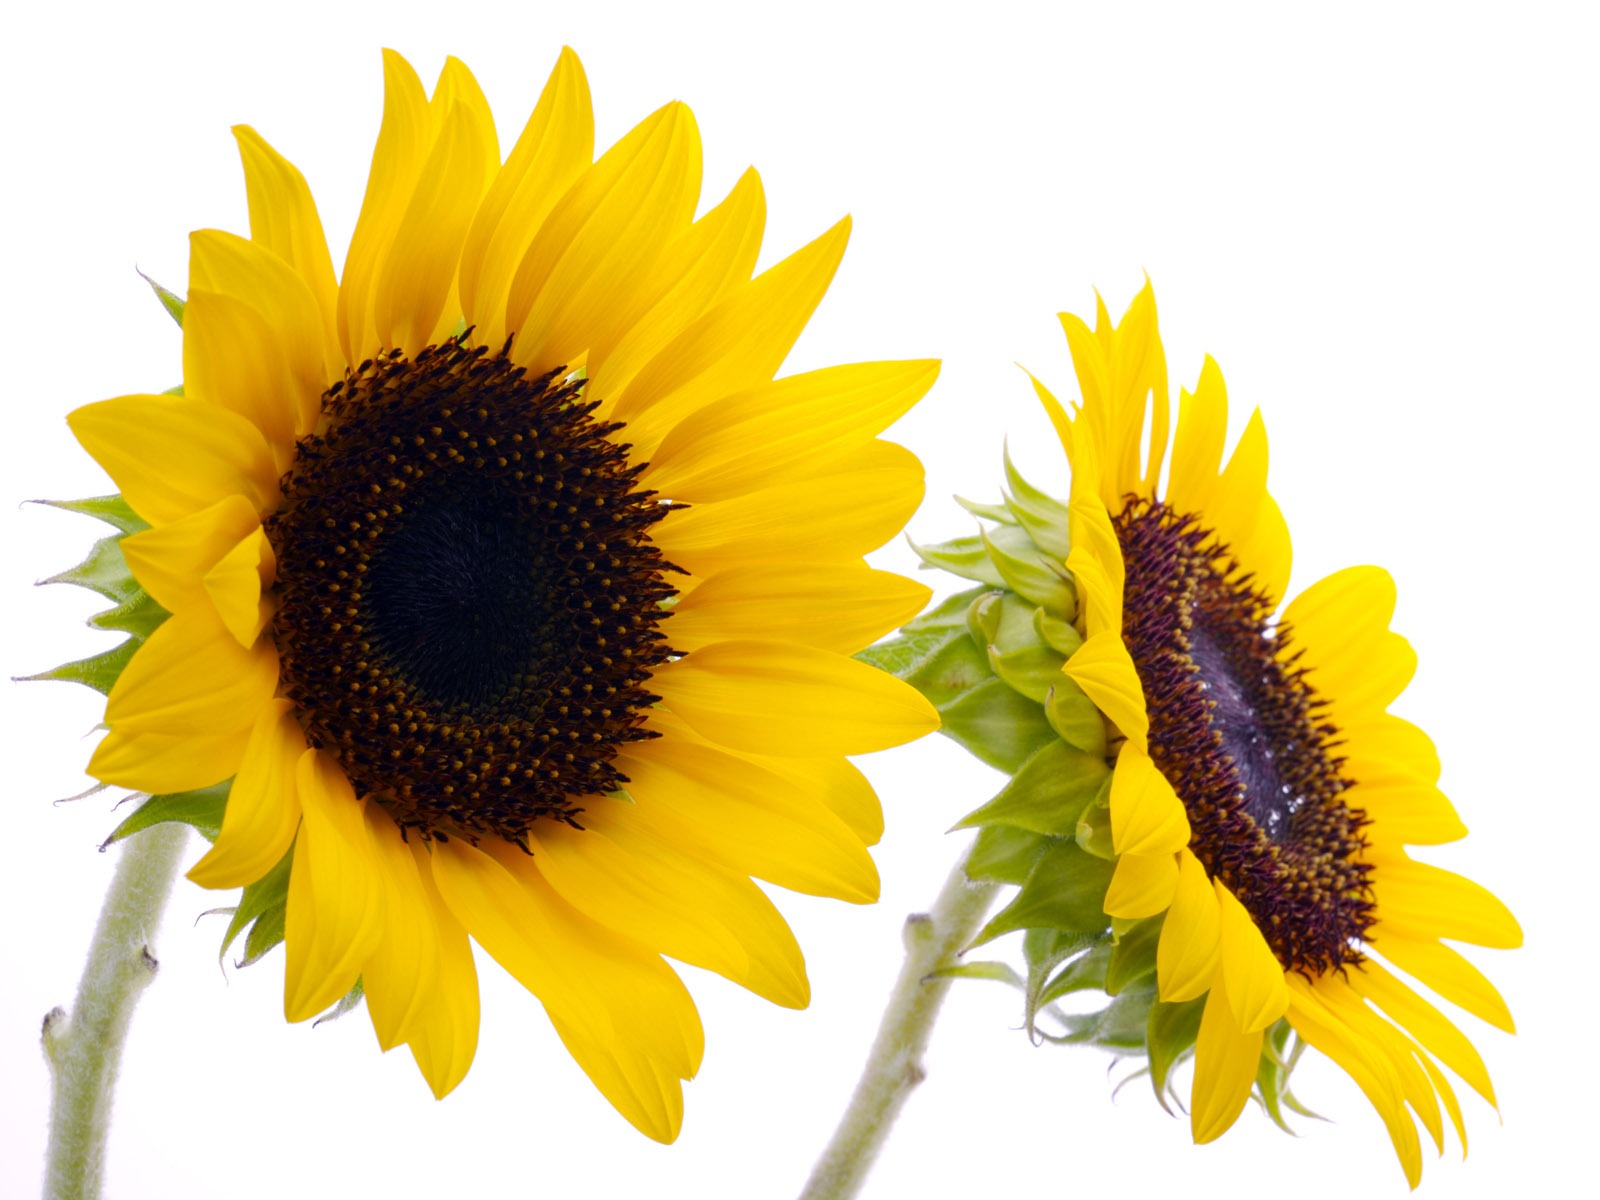 Sunny sunflower photo HD Wallpapers #28 - 1600x1200